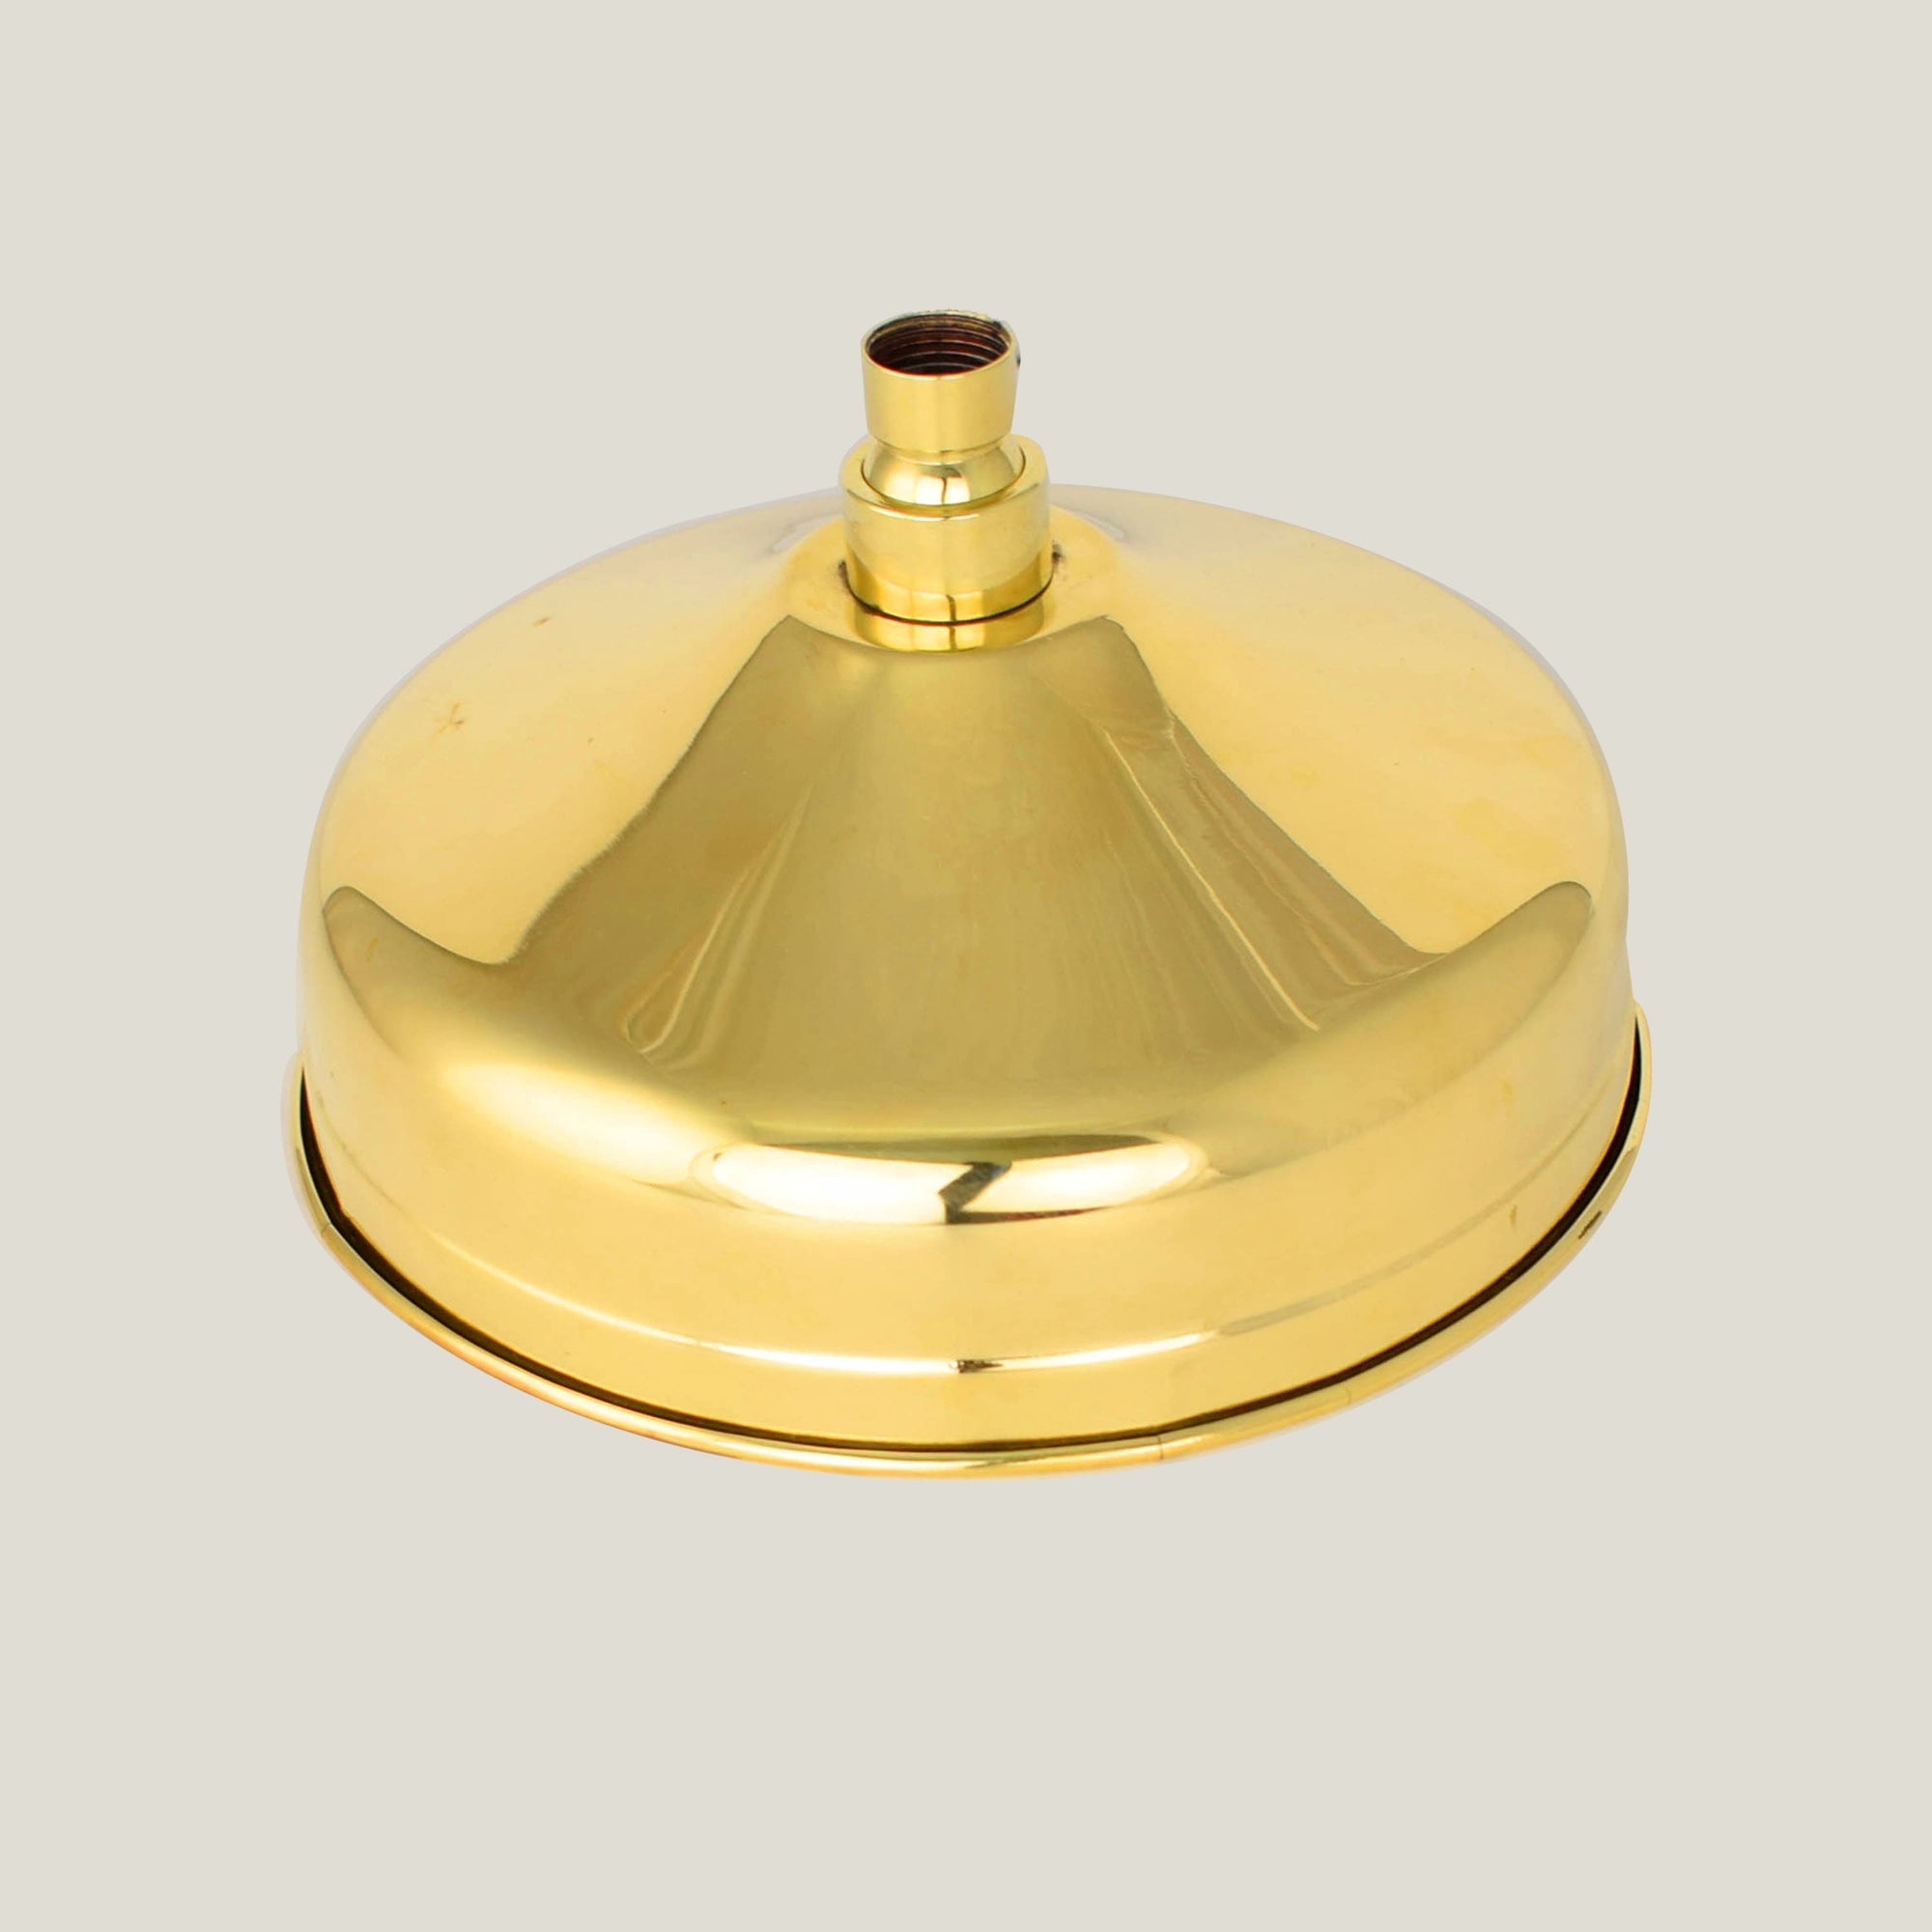 A minimalist brass shower head with a simple and sleek round design, providing a powerful rainfall spray pattern - Made in England